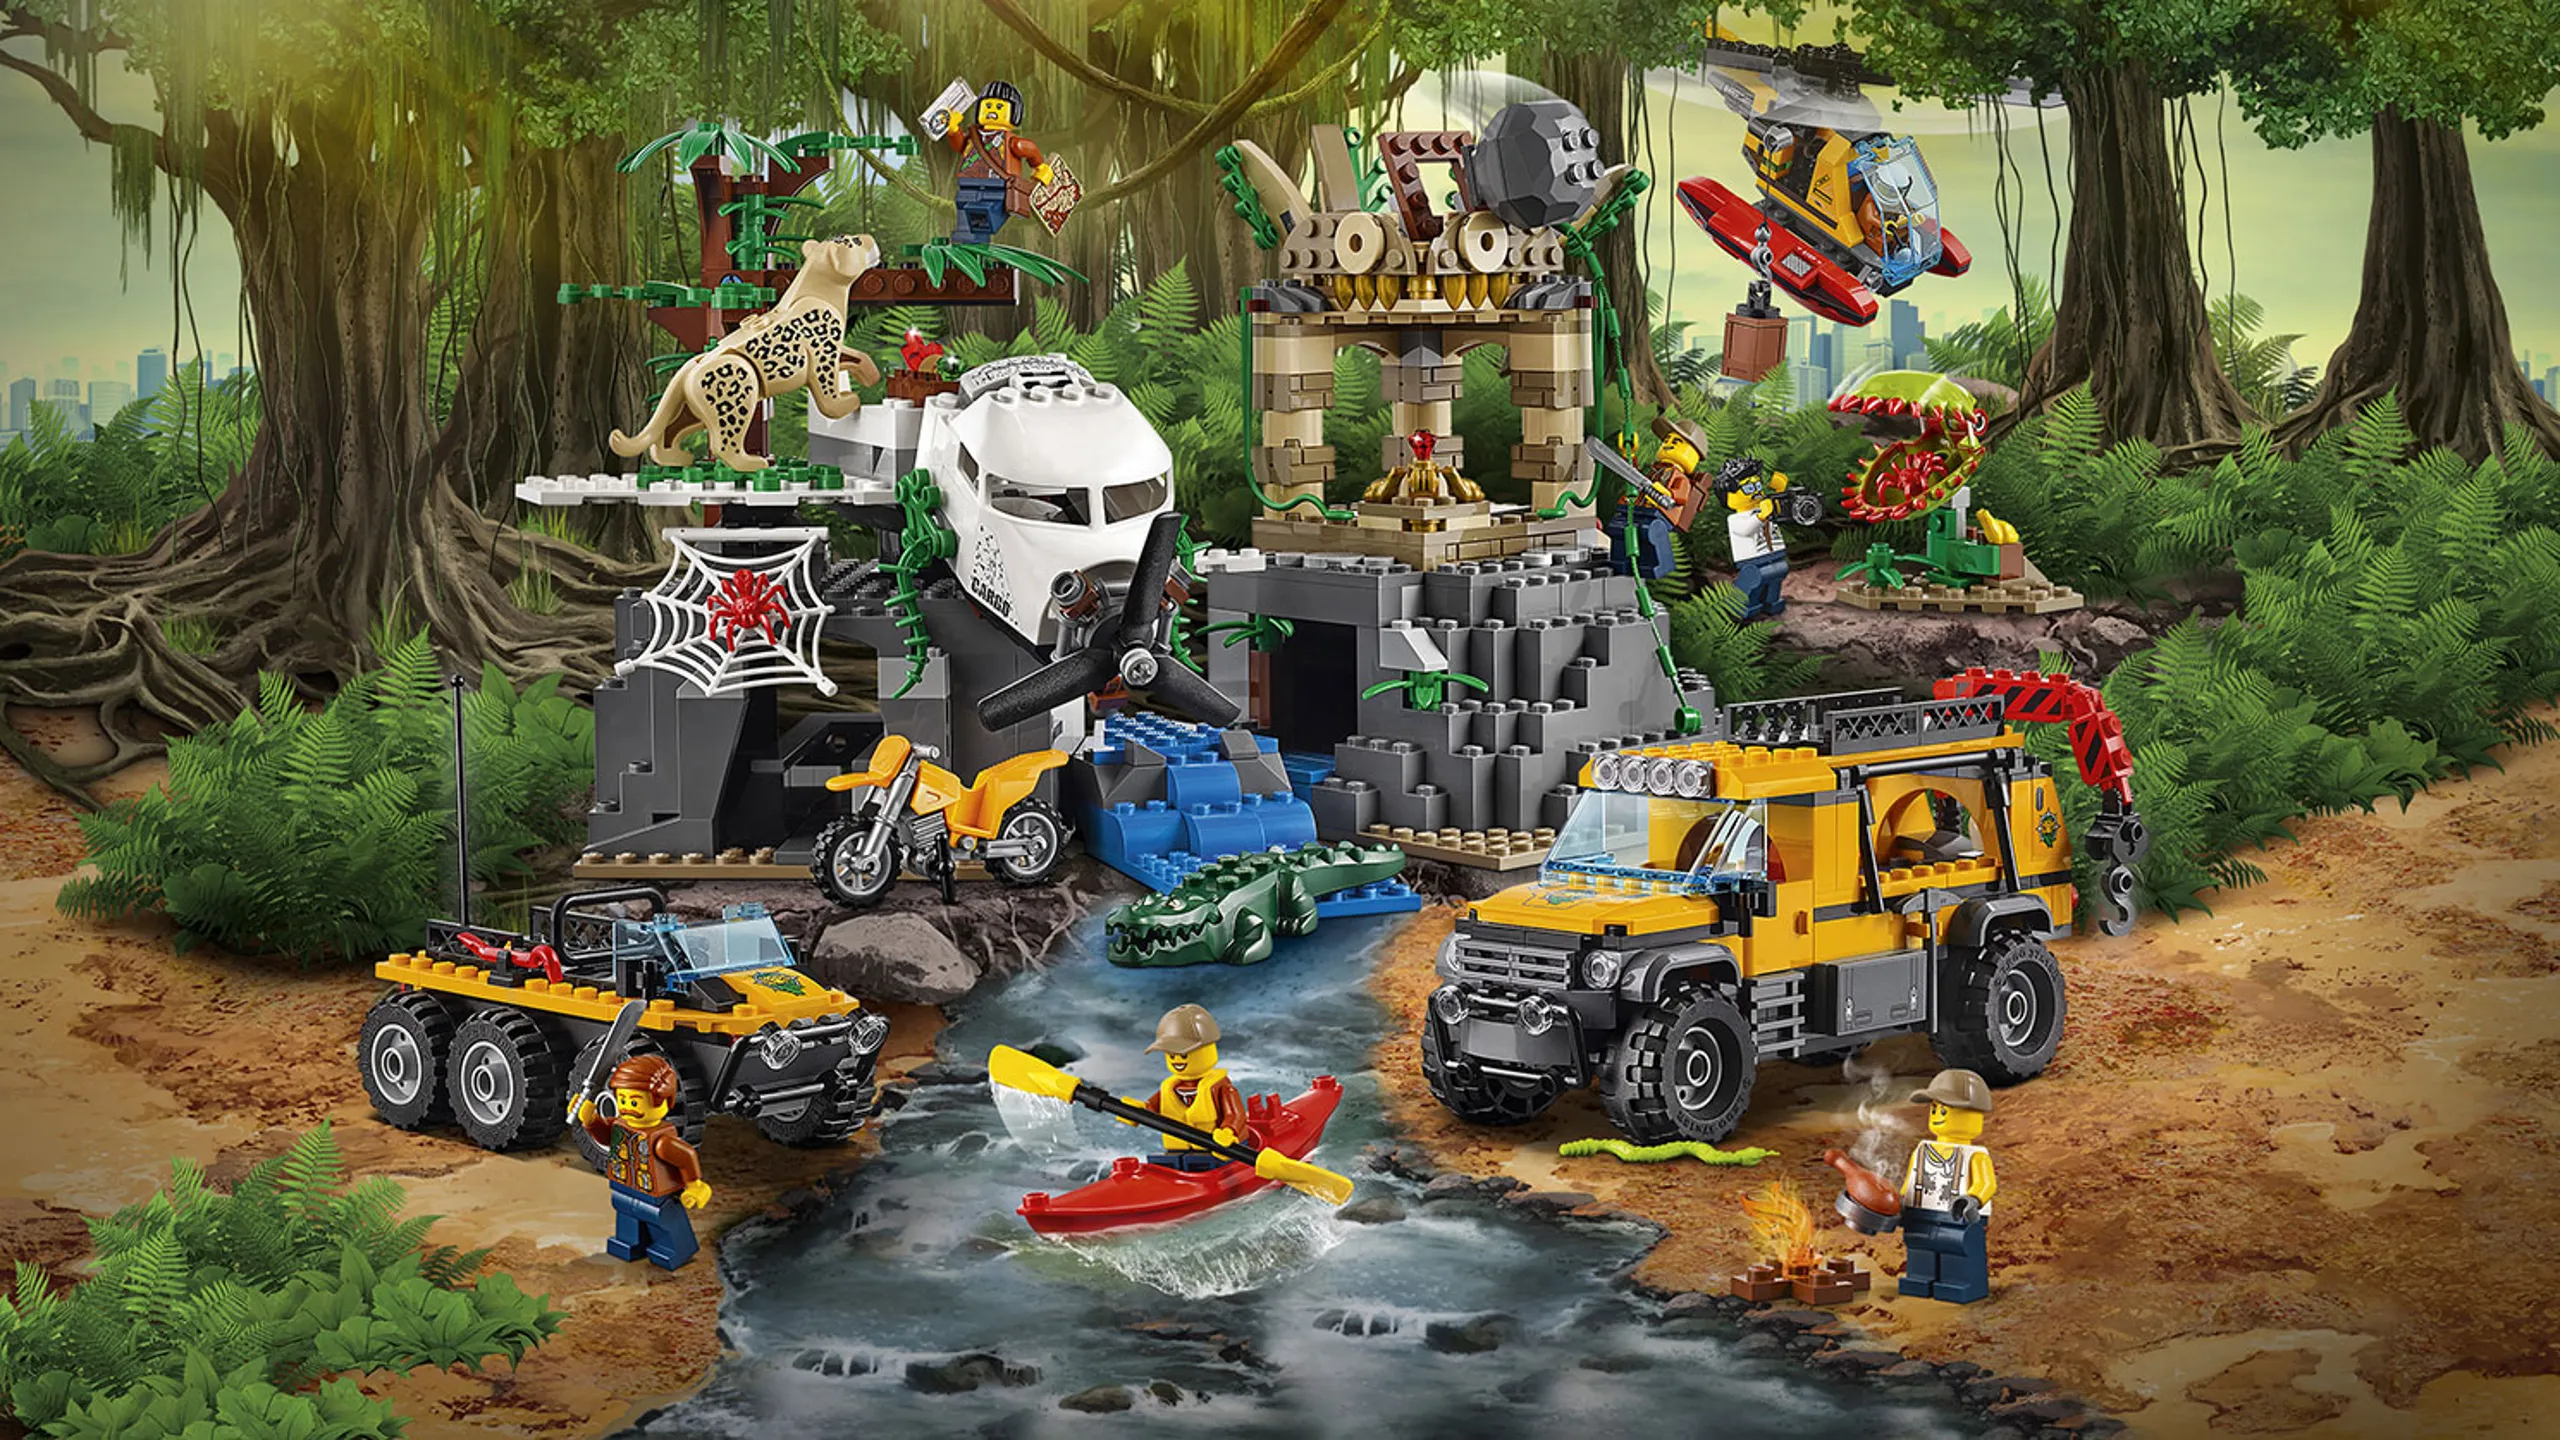 LEGO City Jungle - 60161 Jungle Exploration Site -  Explore the plants and animals of the jungle with the helicopter and the mobile lab.